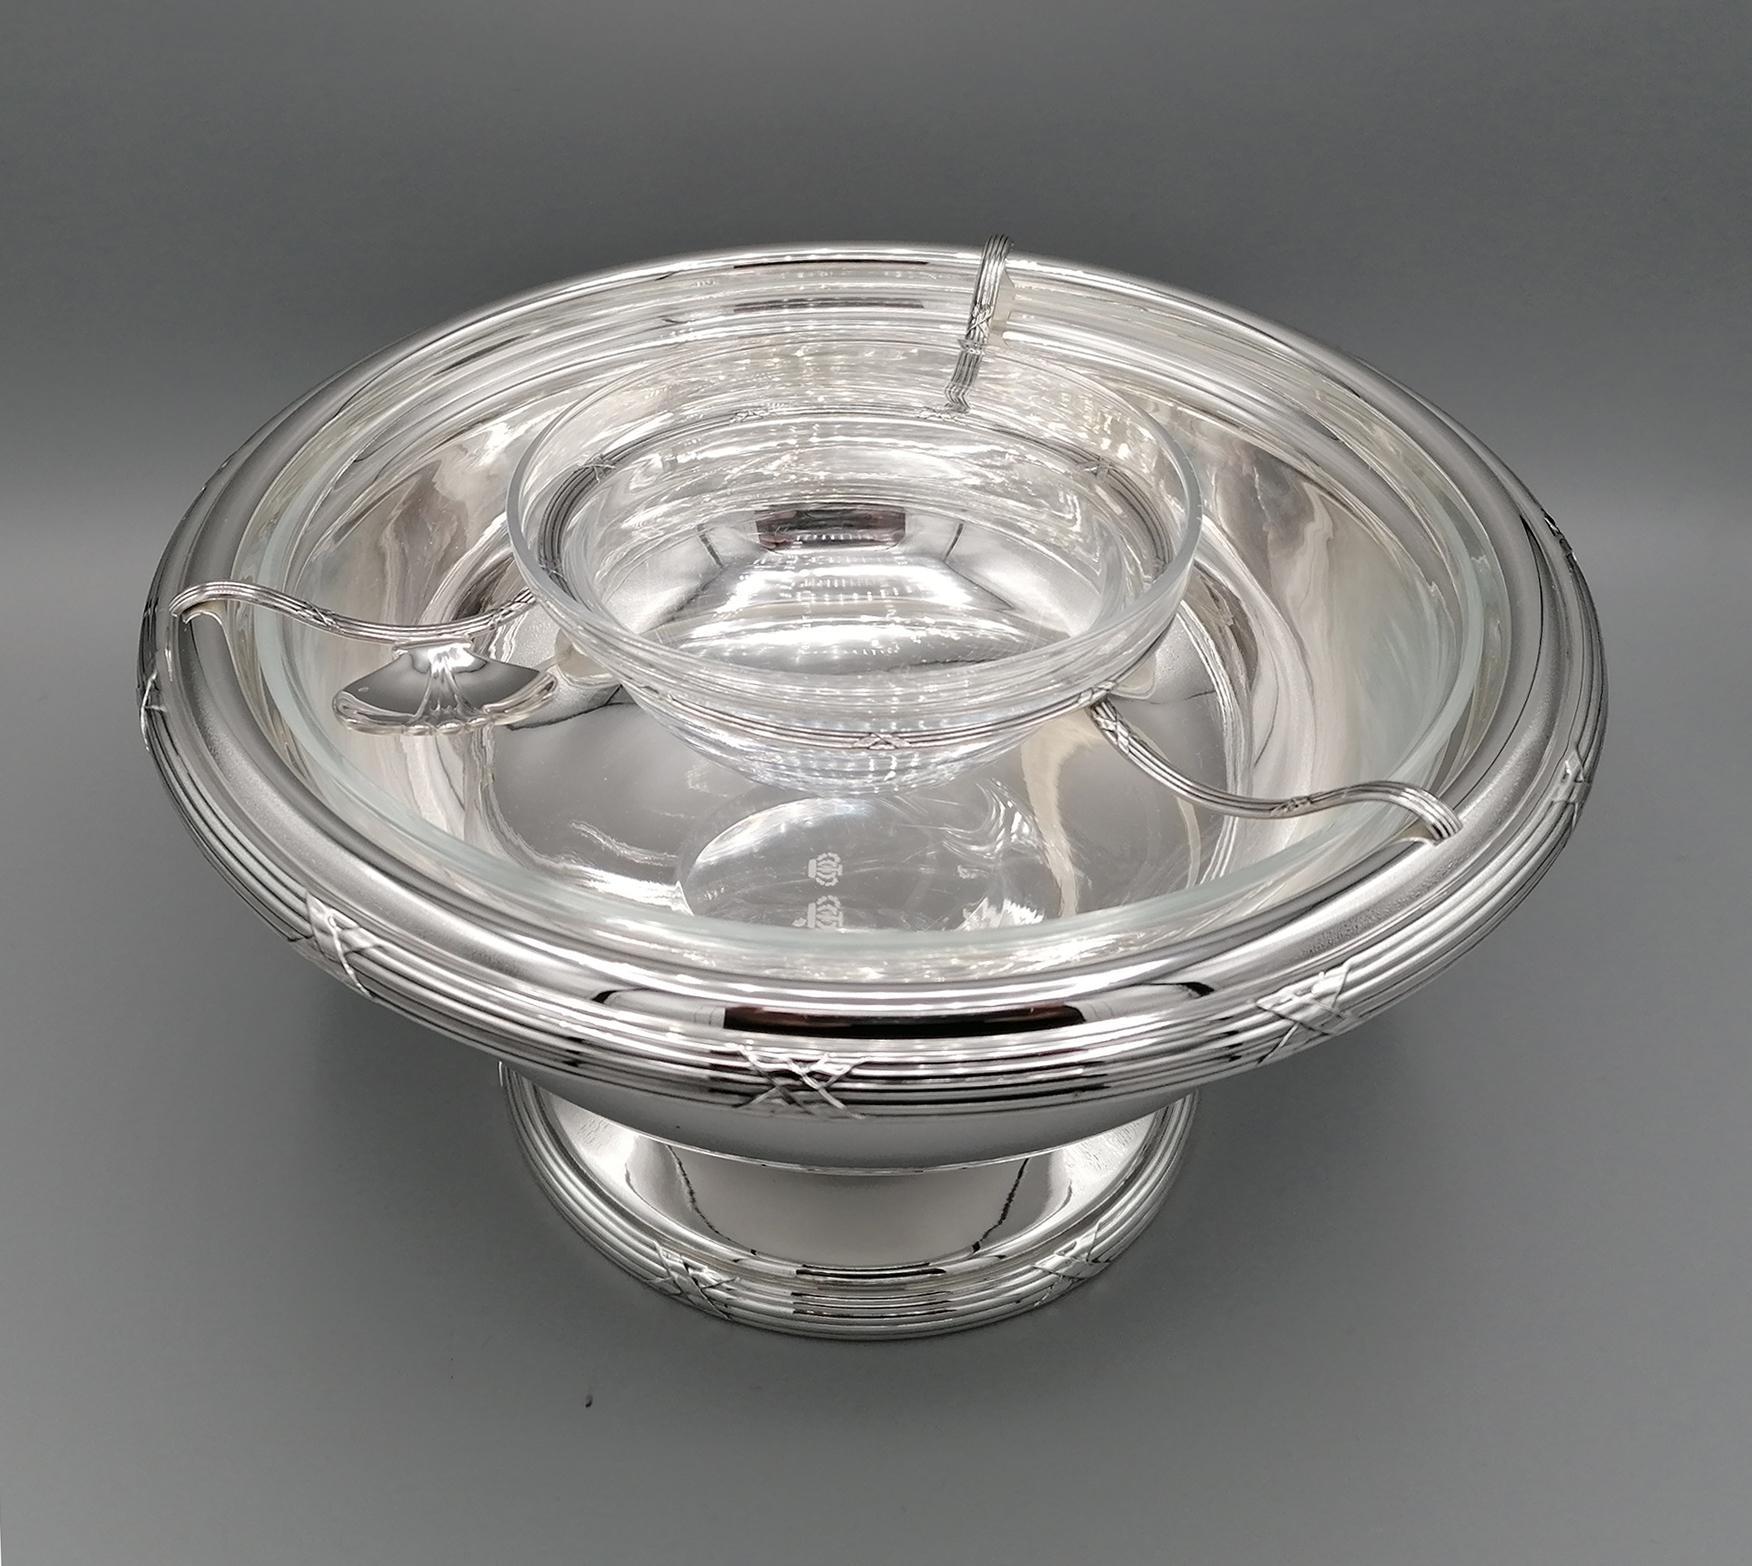 Gorgeous bowl for caviar by Gianmaria Buccellati. 
The body was made in two parts, cup and base. 
The welded edge with cross ribbon characterizes the Classic Luis XVI style. 
A wire circle, also in silver, supports a crystal cup for caviar, while a